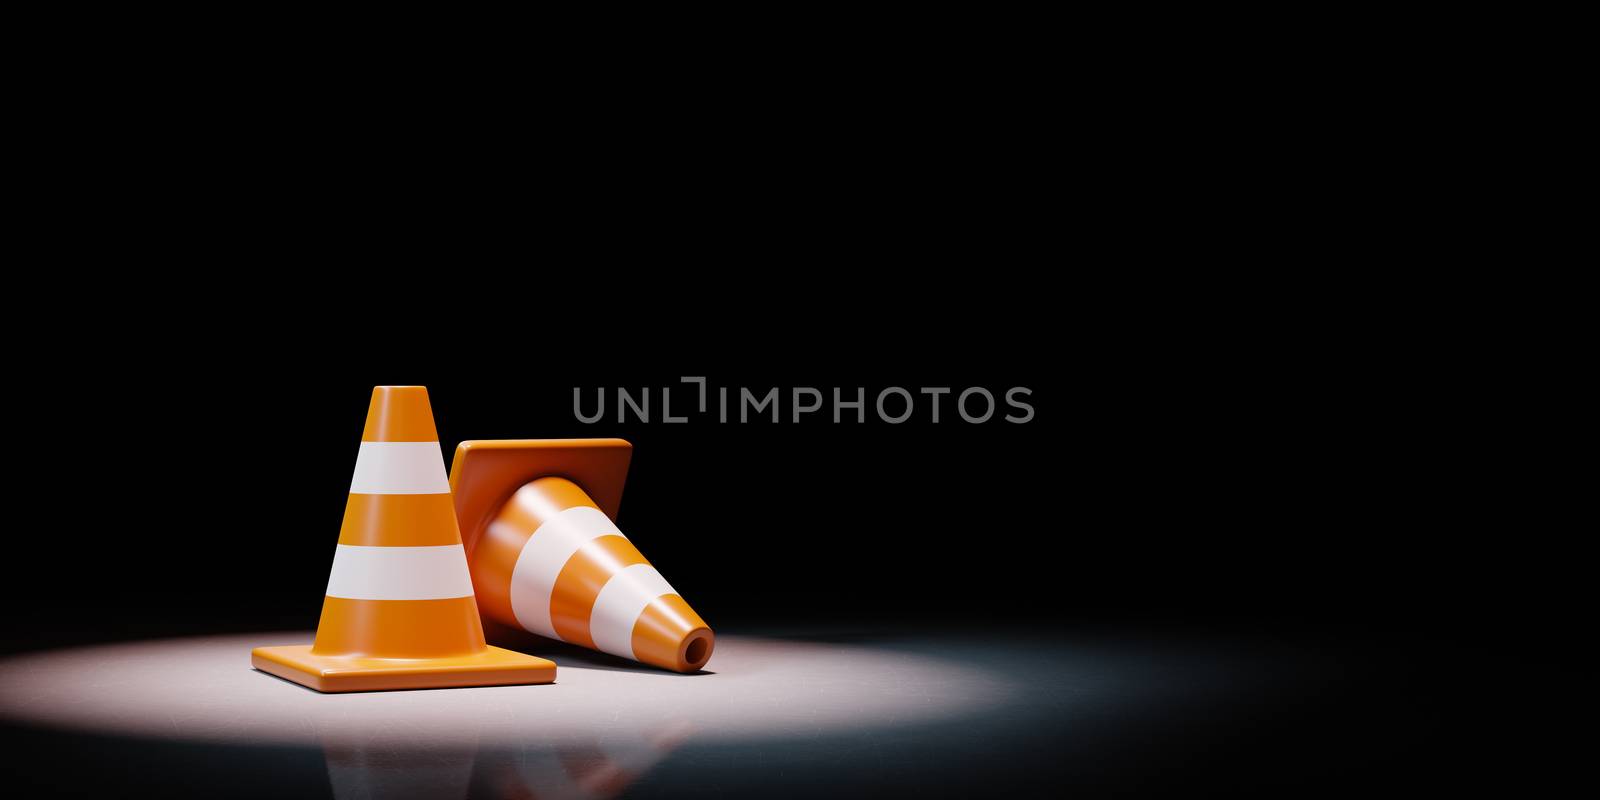 Two Orange Traffic Cones Spotlighted on Black Background with Copy Space 3D Illustration